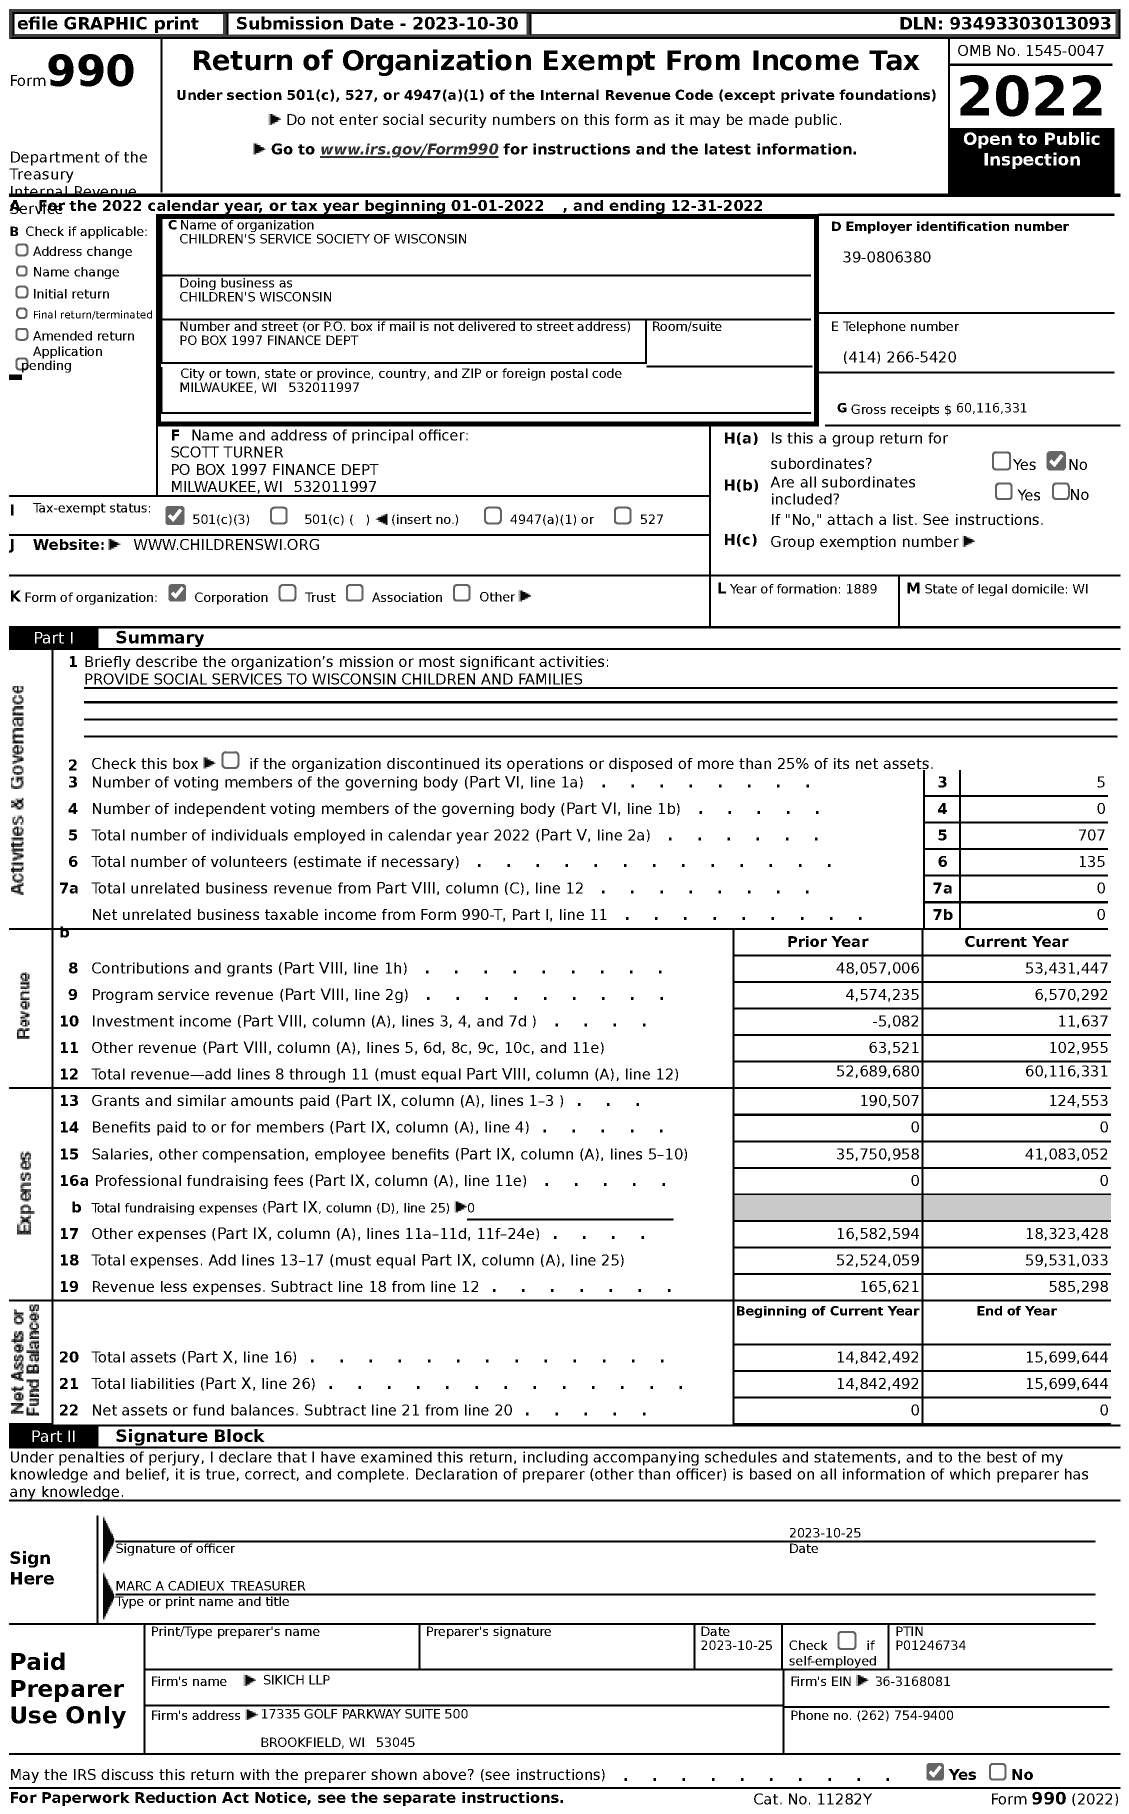 Image of first page of 2022 Form 990 for Children's Wisconsin (CHW)